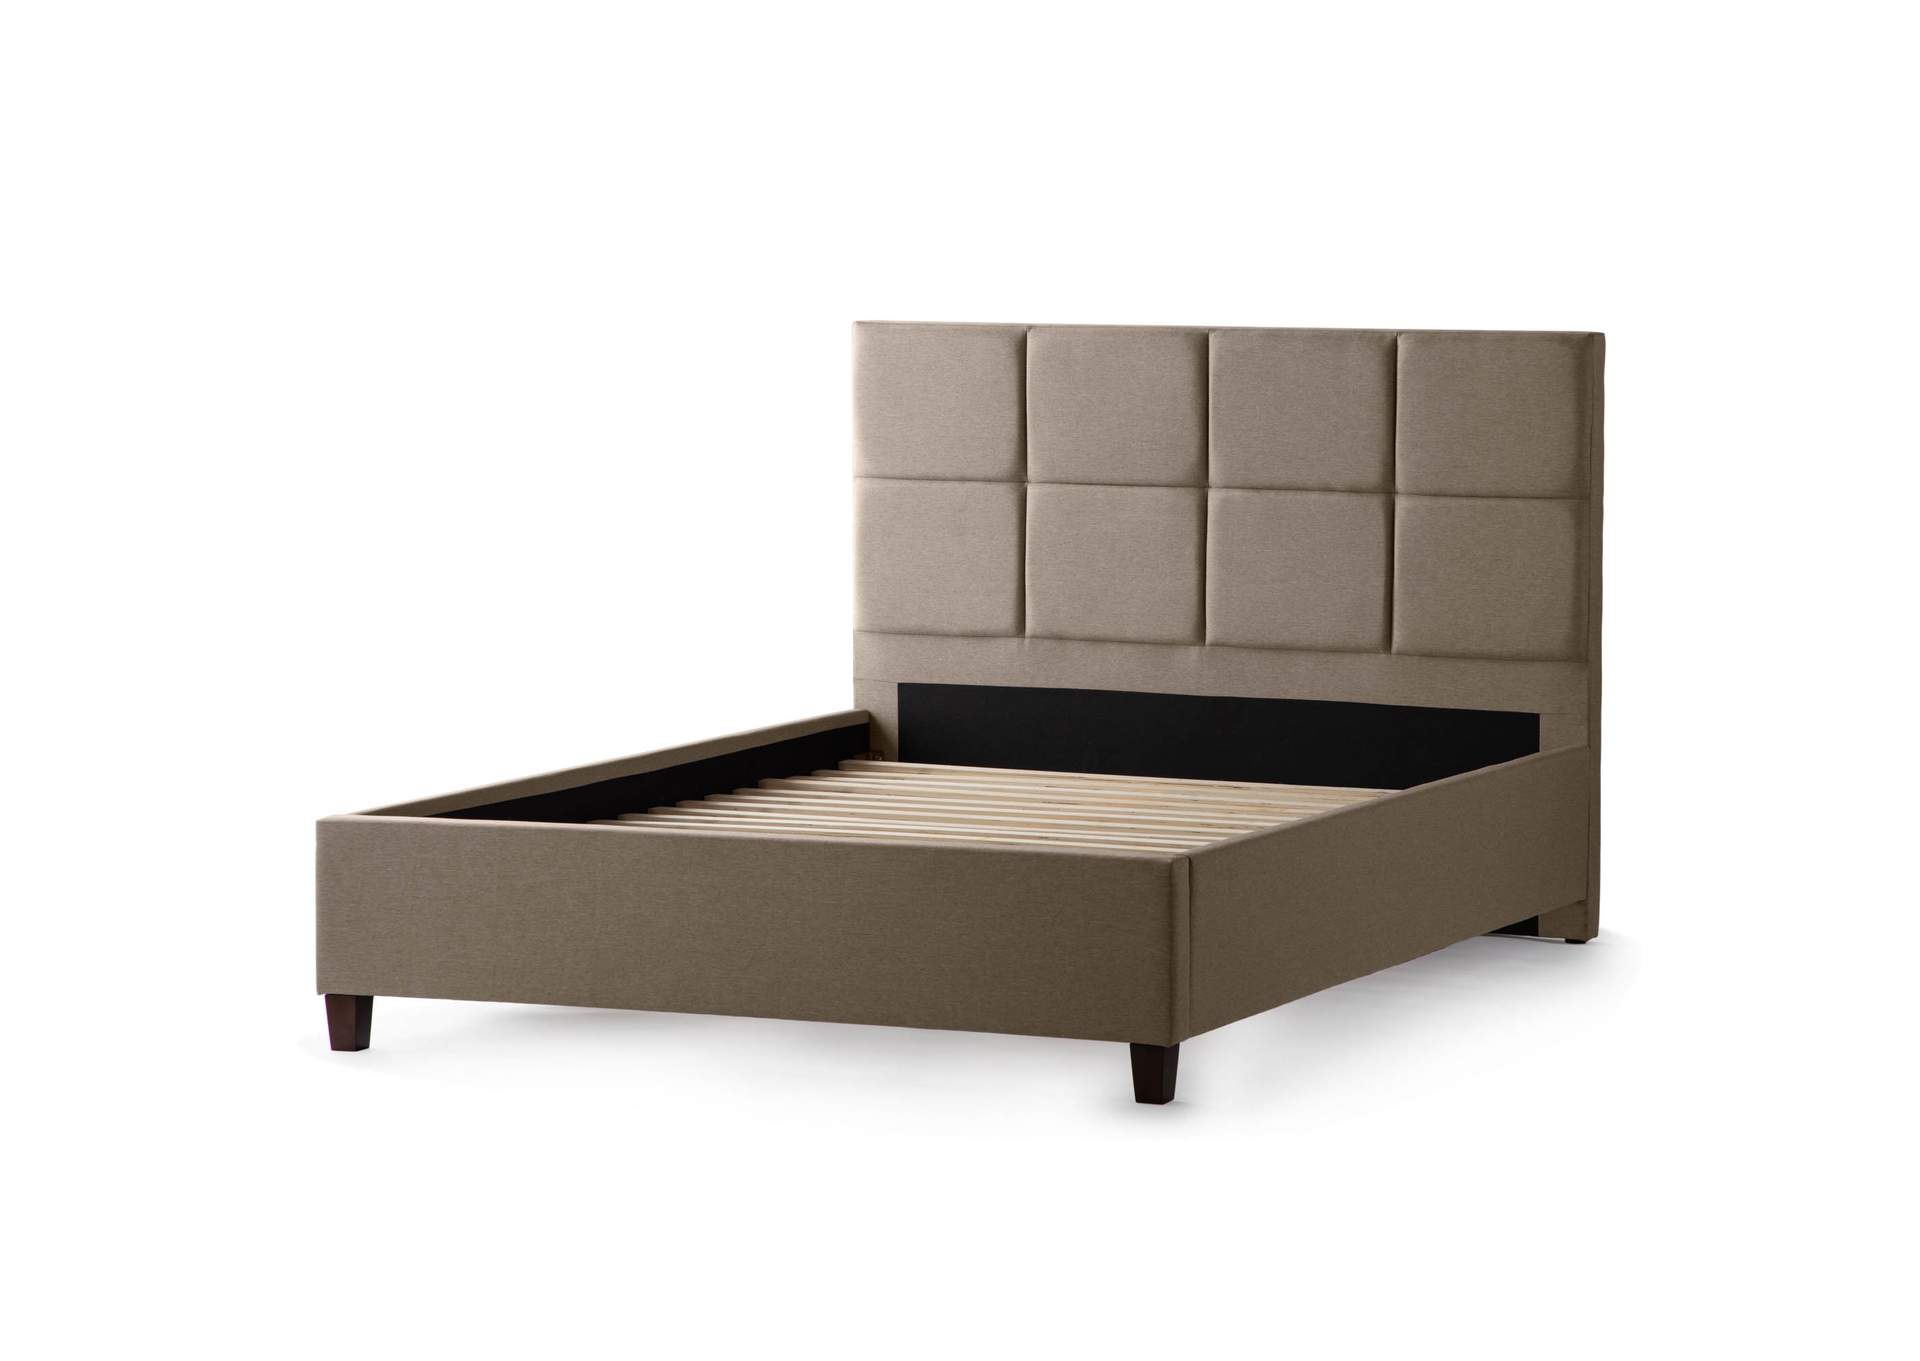 Malouf Spruce Scoresby Upholstered Full Bed,Malouf